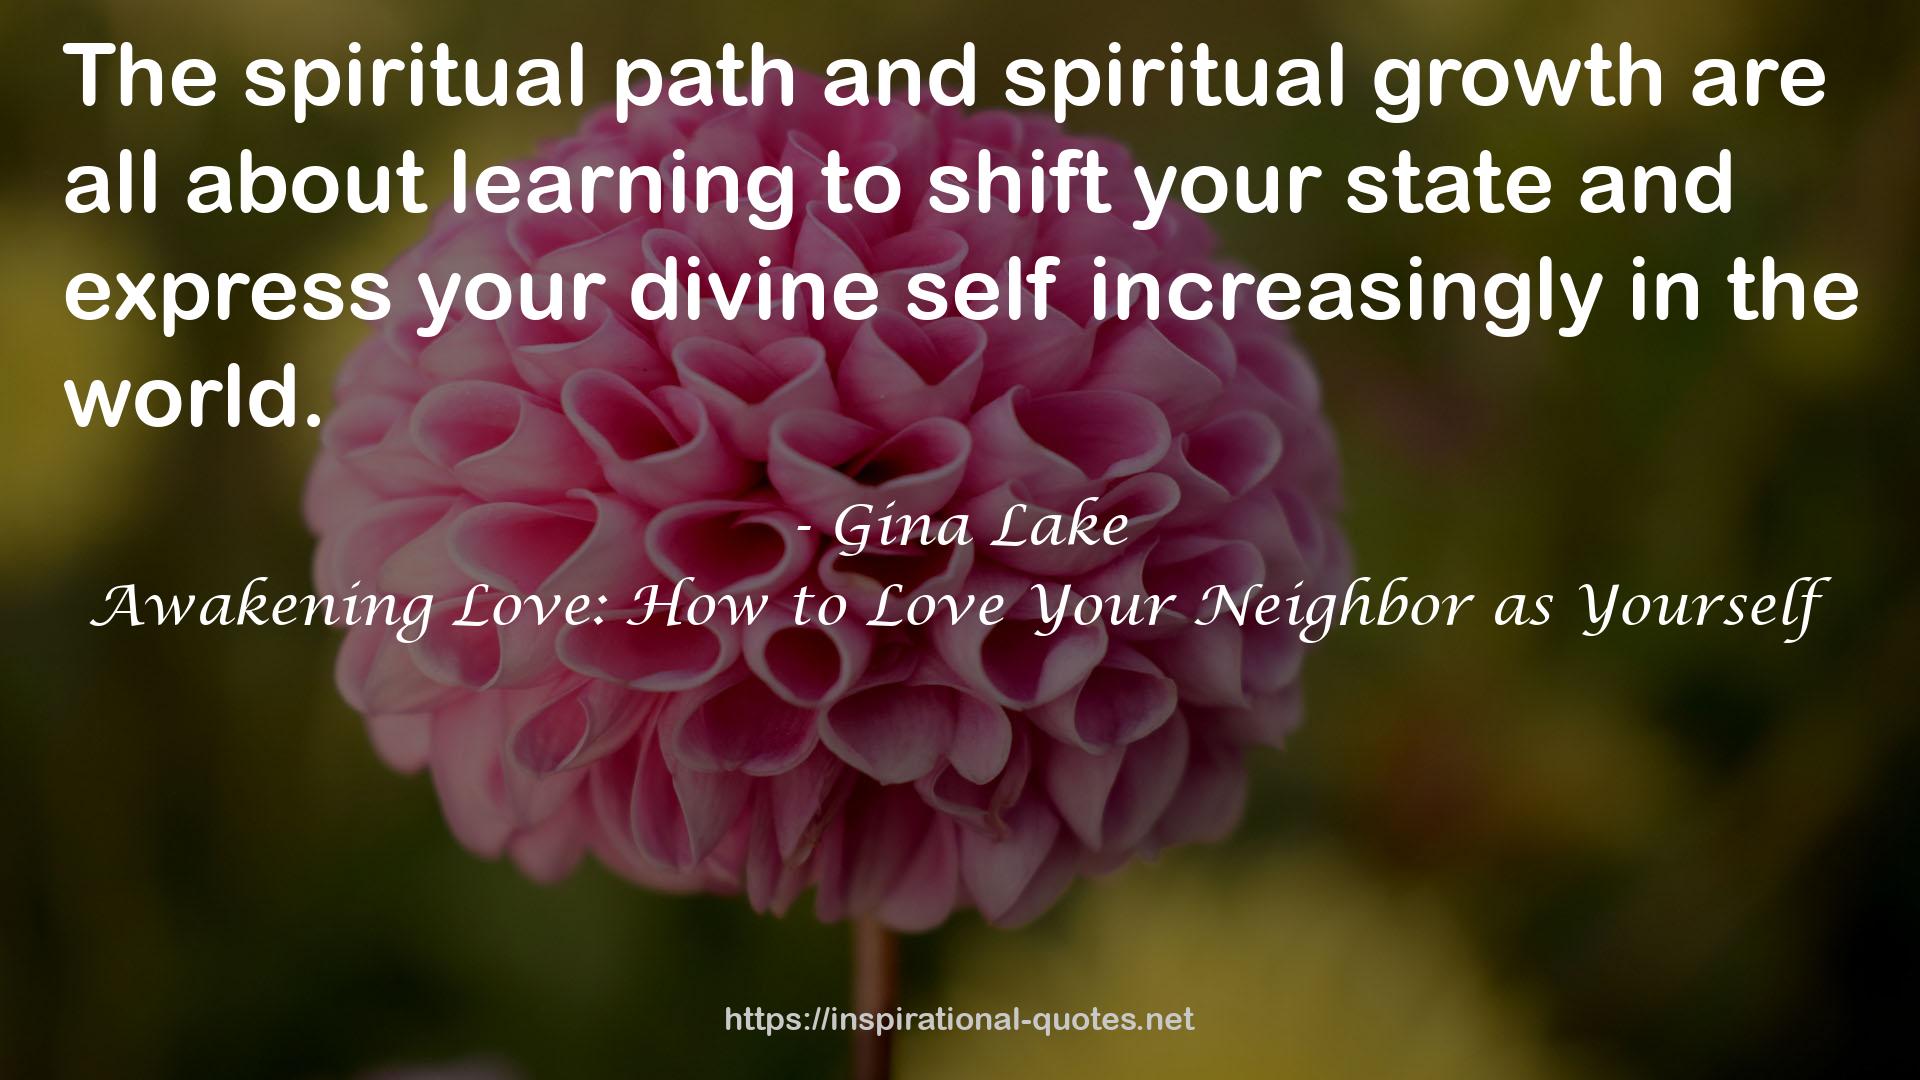 Awakening Love: How to Love Your Neighbor as Yourself QUOTES